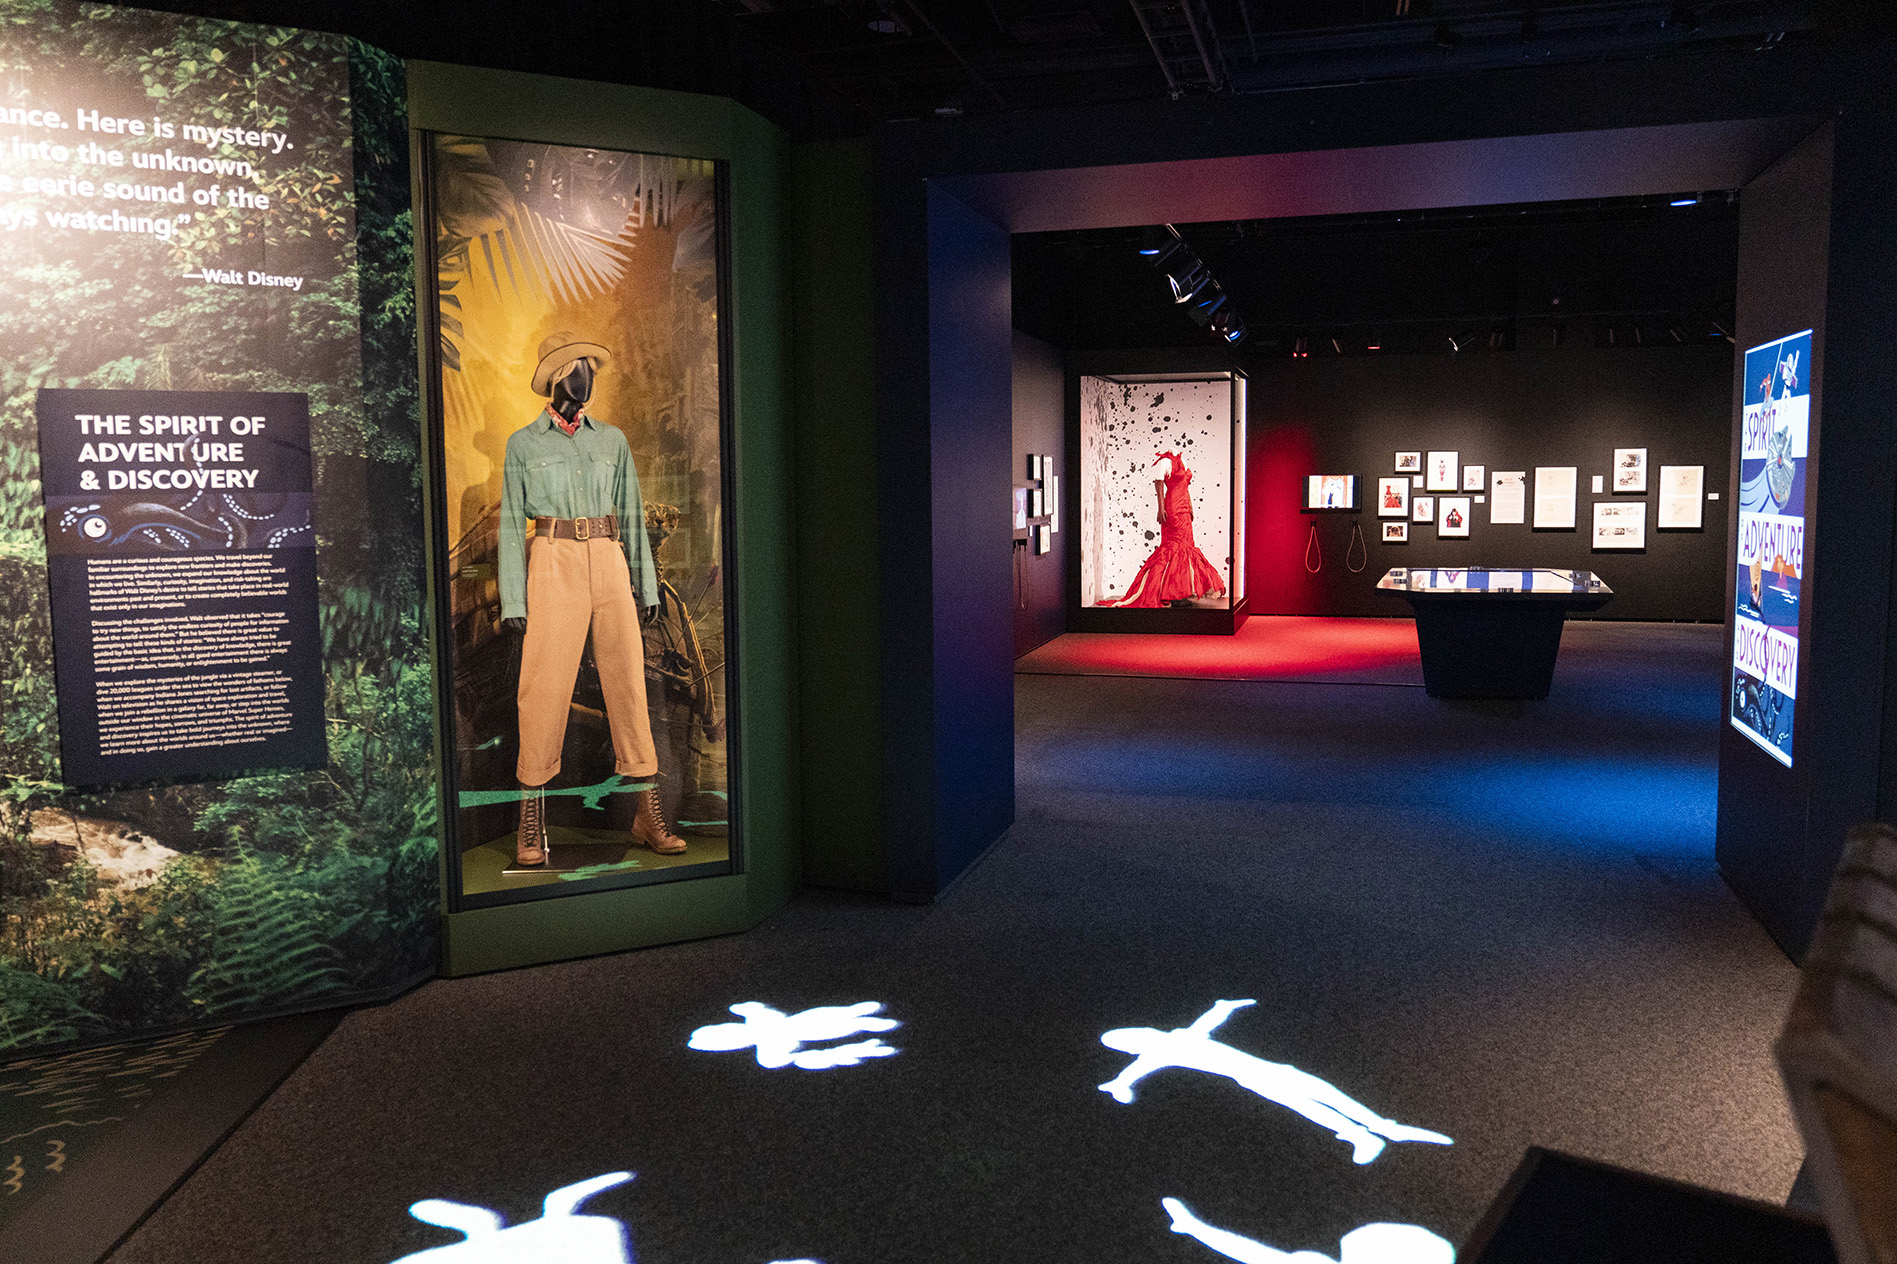 The Spirit of Adventure and Discovery gallery at Disney100: The Exhibition, now open at The Franklin Institute in Philadelphia.